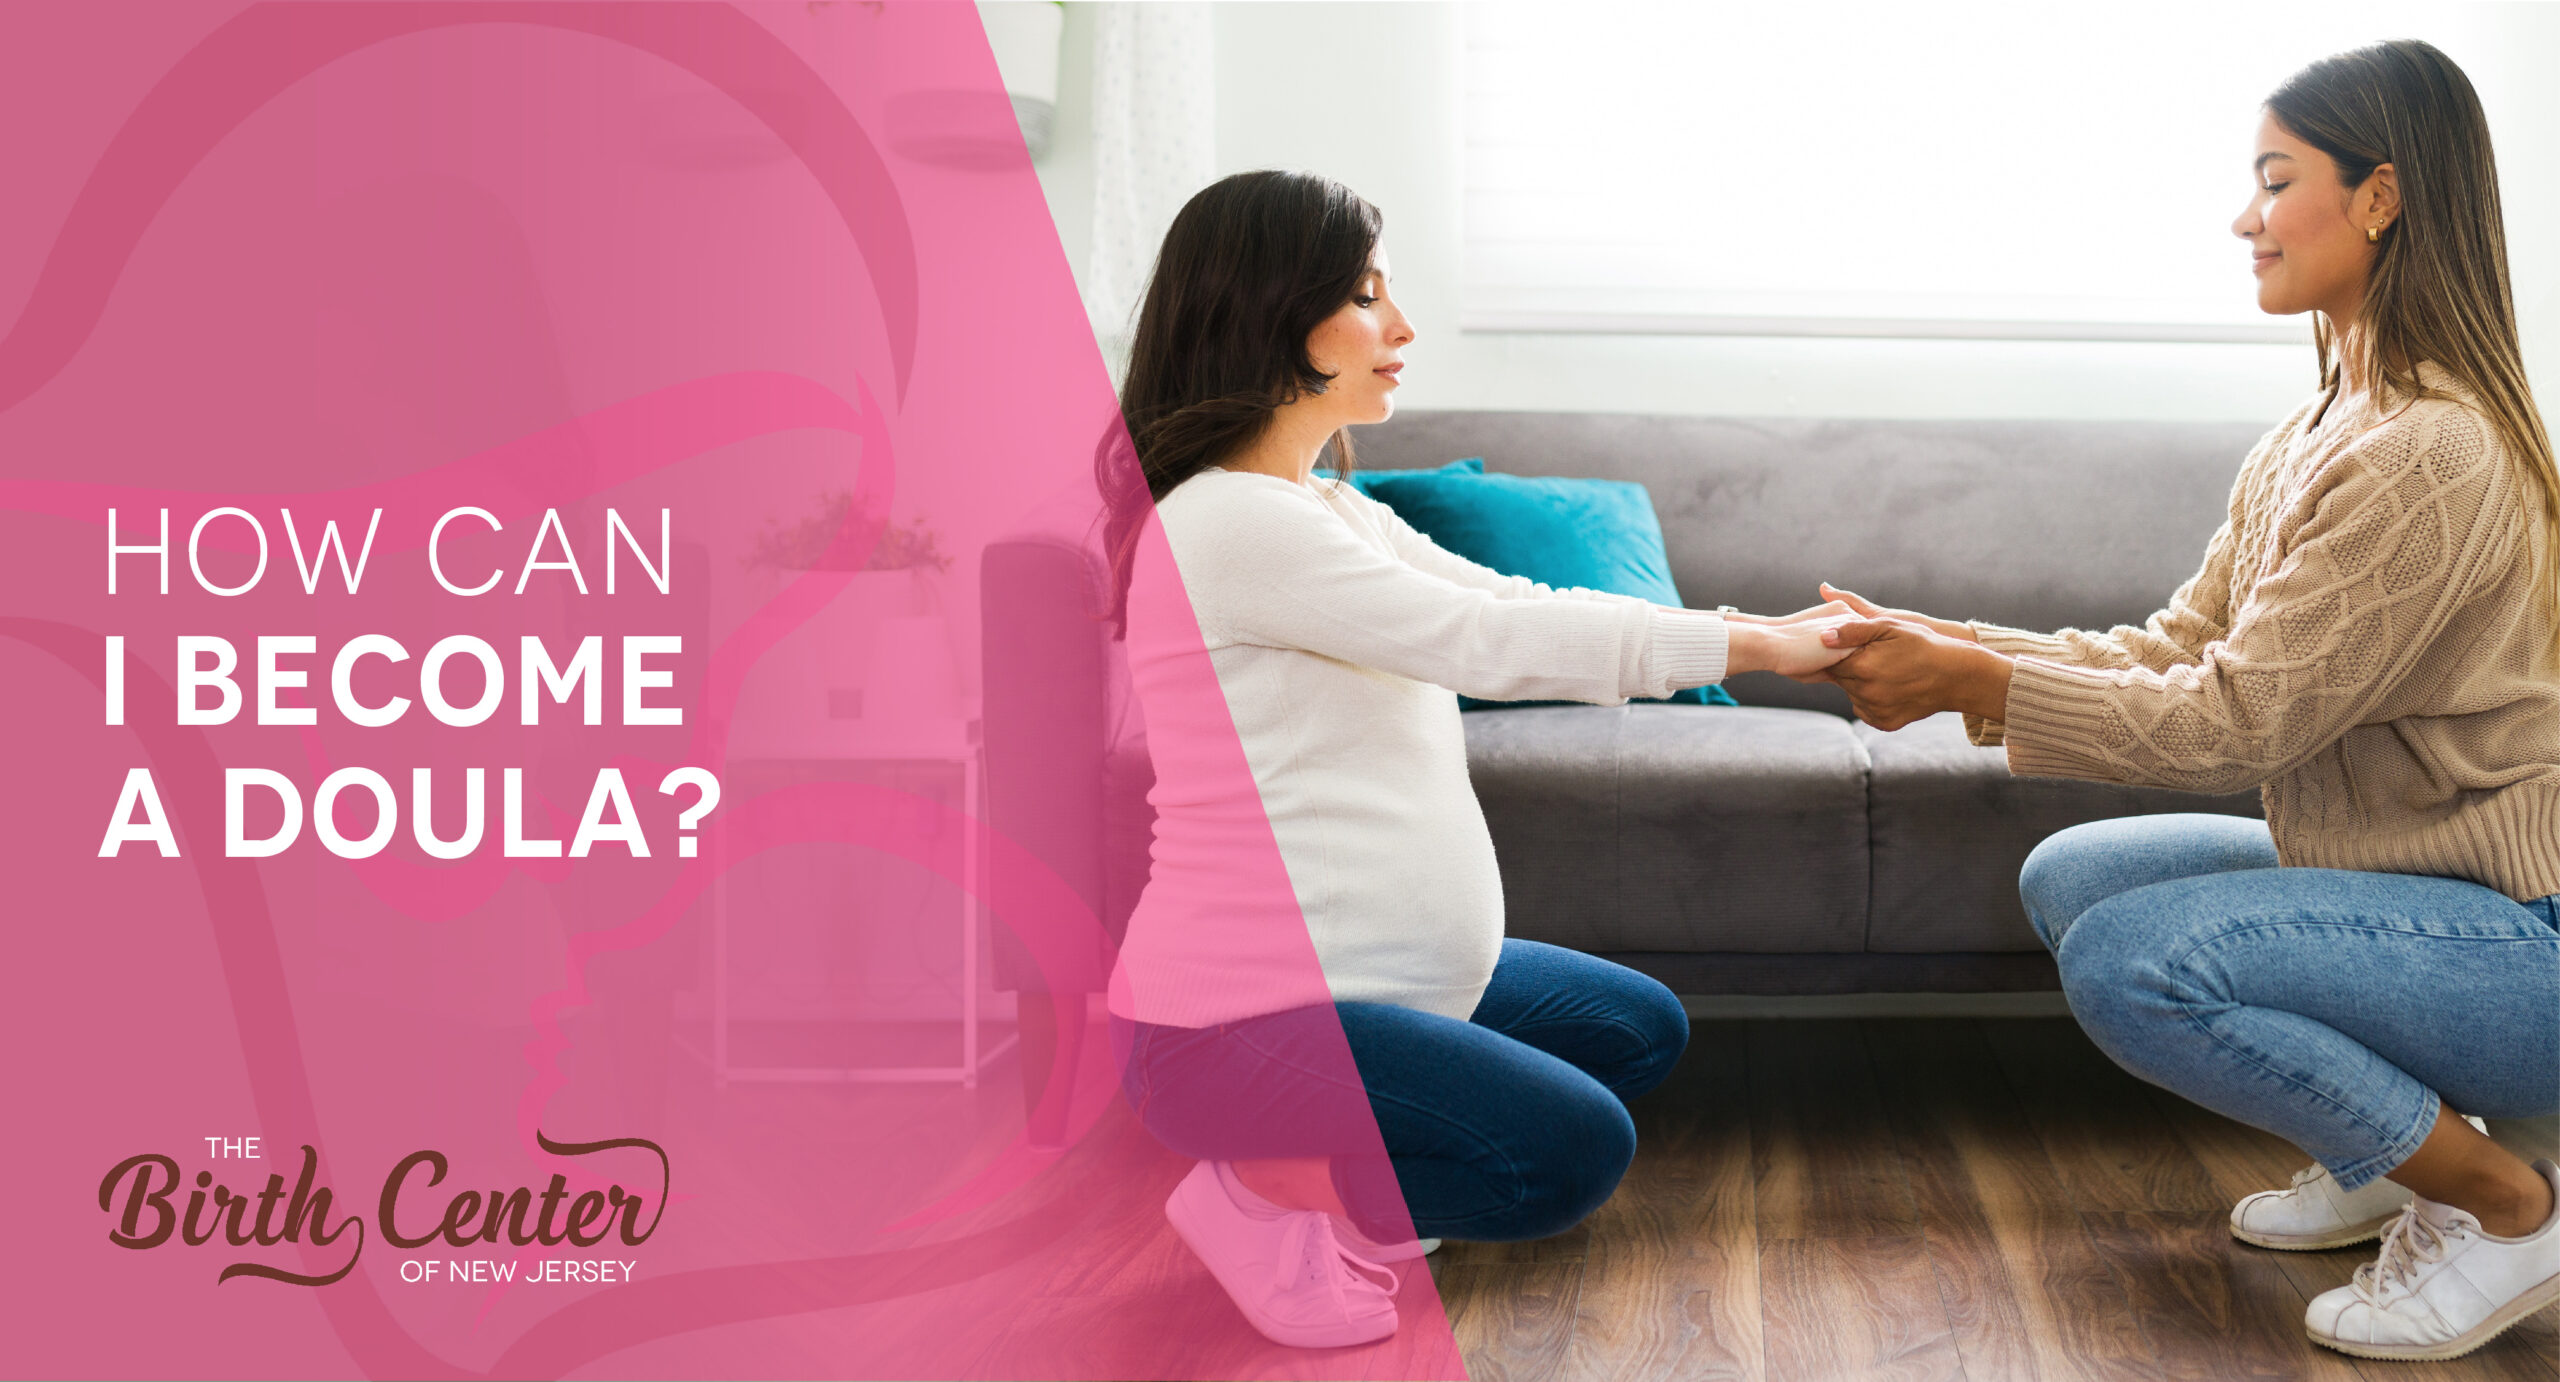 How Can I Become a Doula?